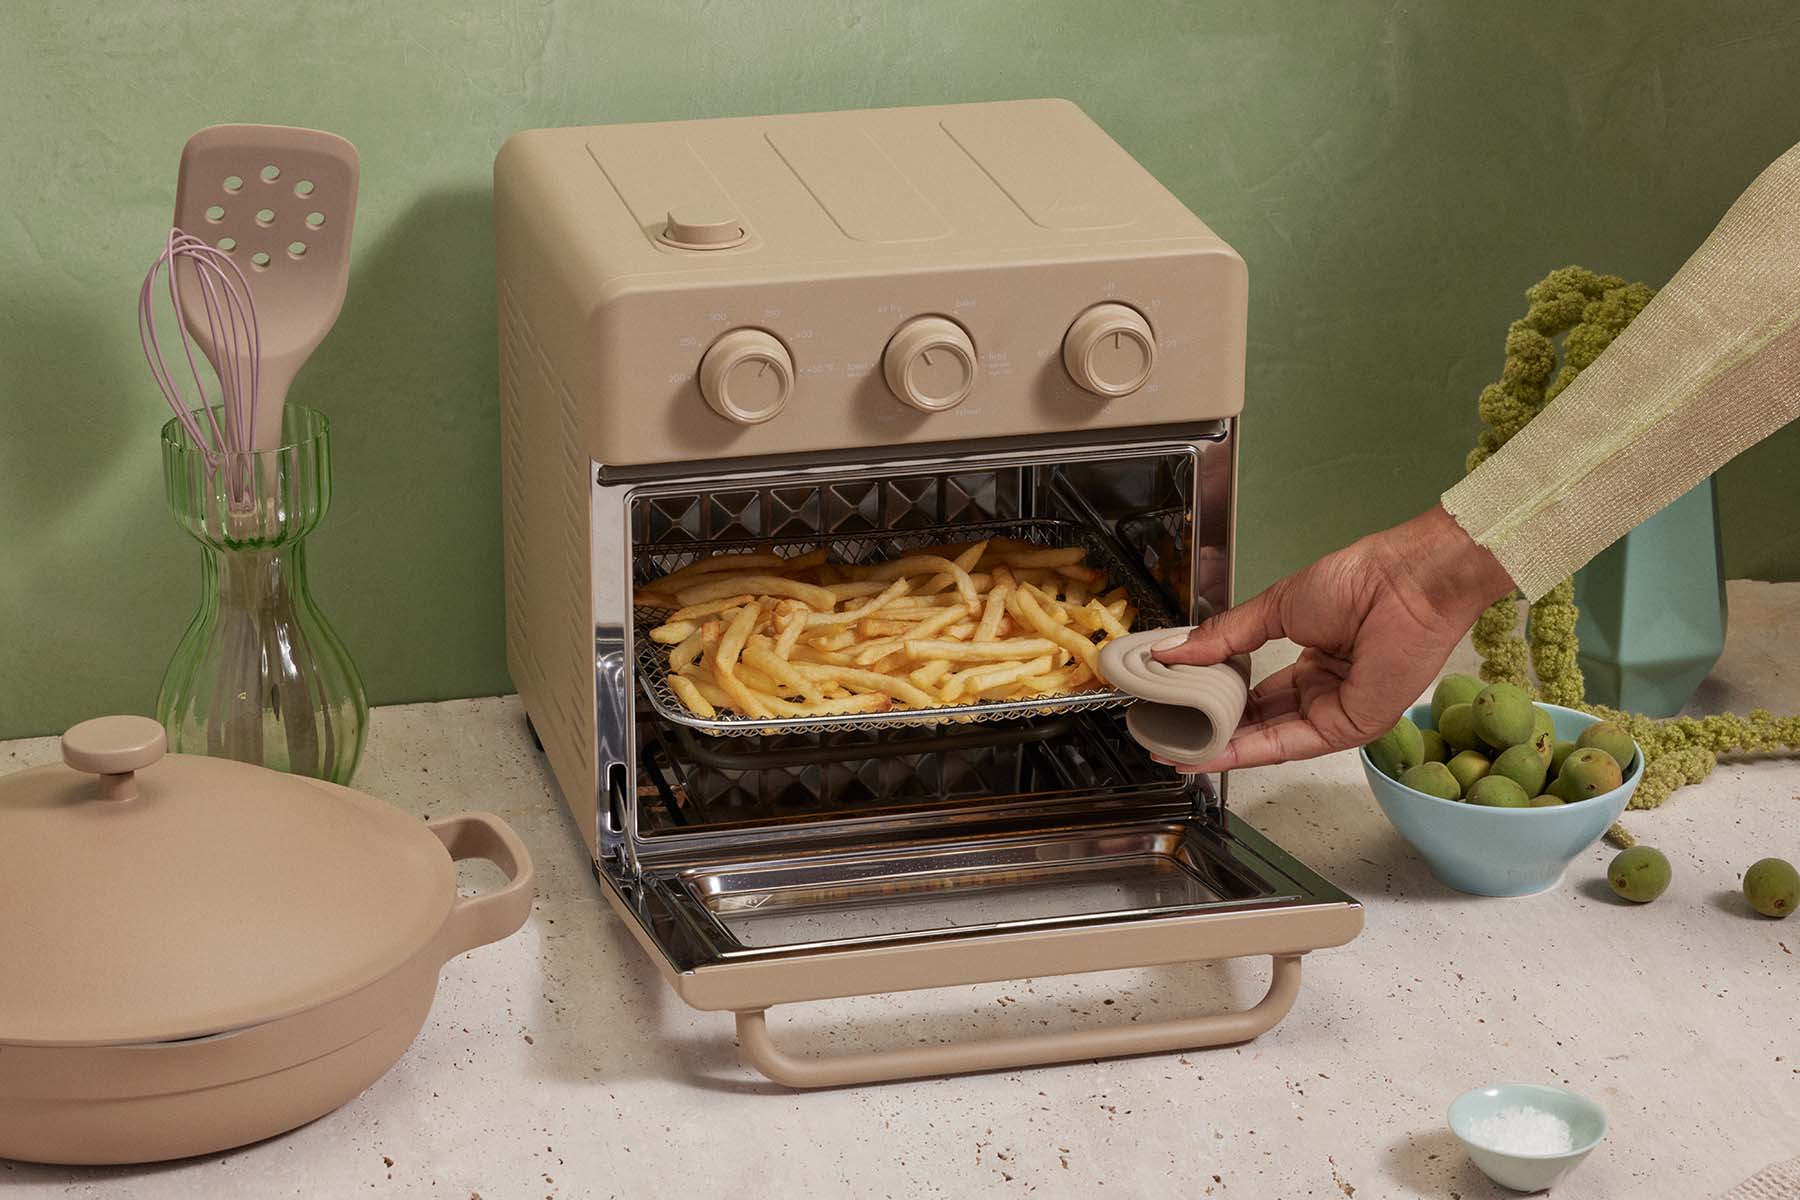 Our Place Wonder Oven Air Fryer Toaster Oven Launch